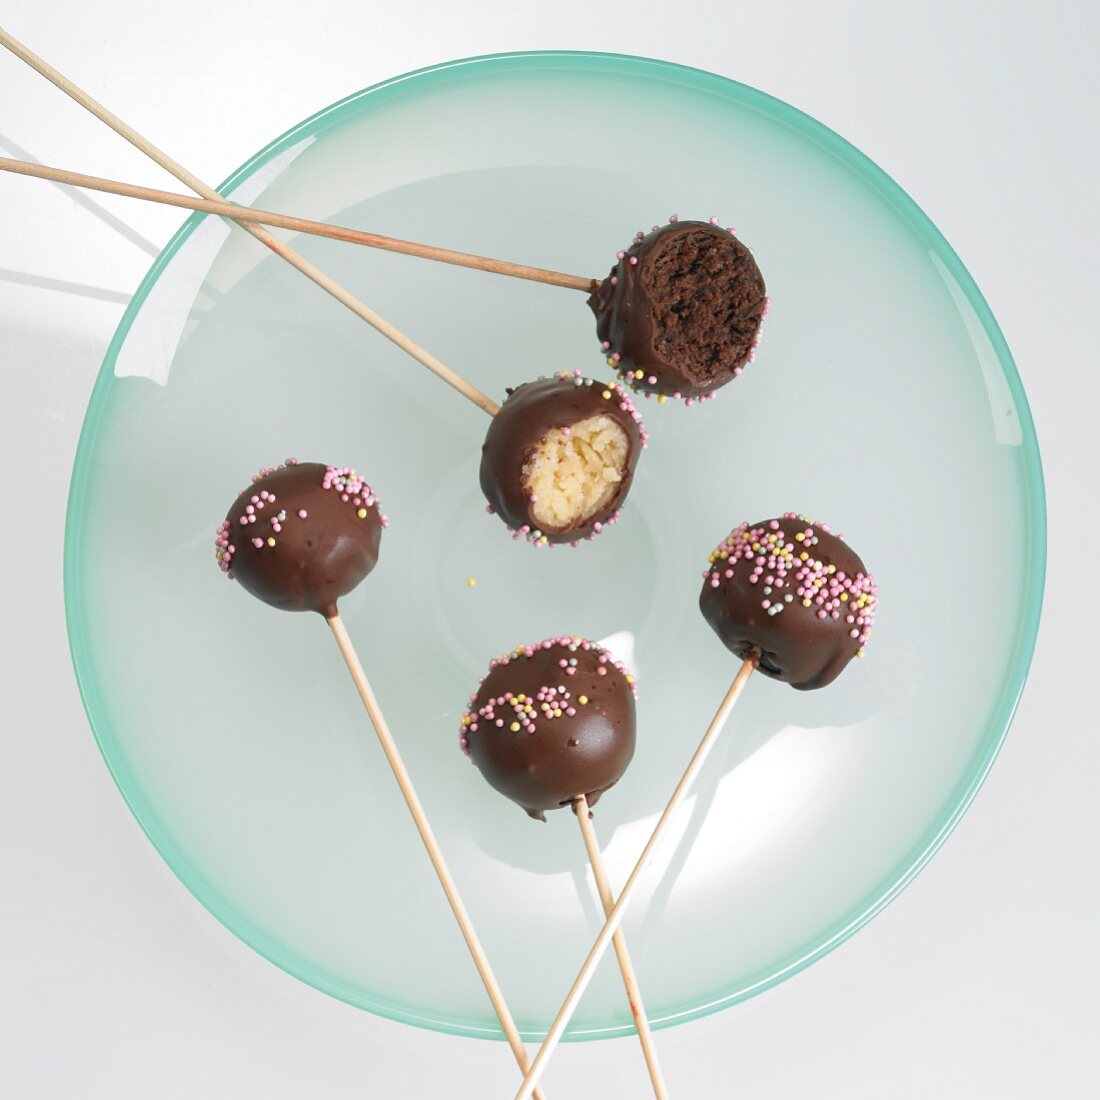 Cake pops with chocolate icing and sugar strands, one with a bite taken out